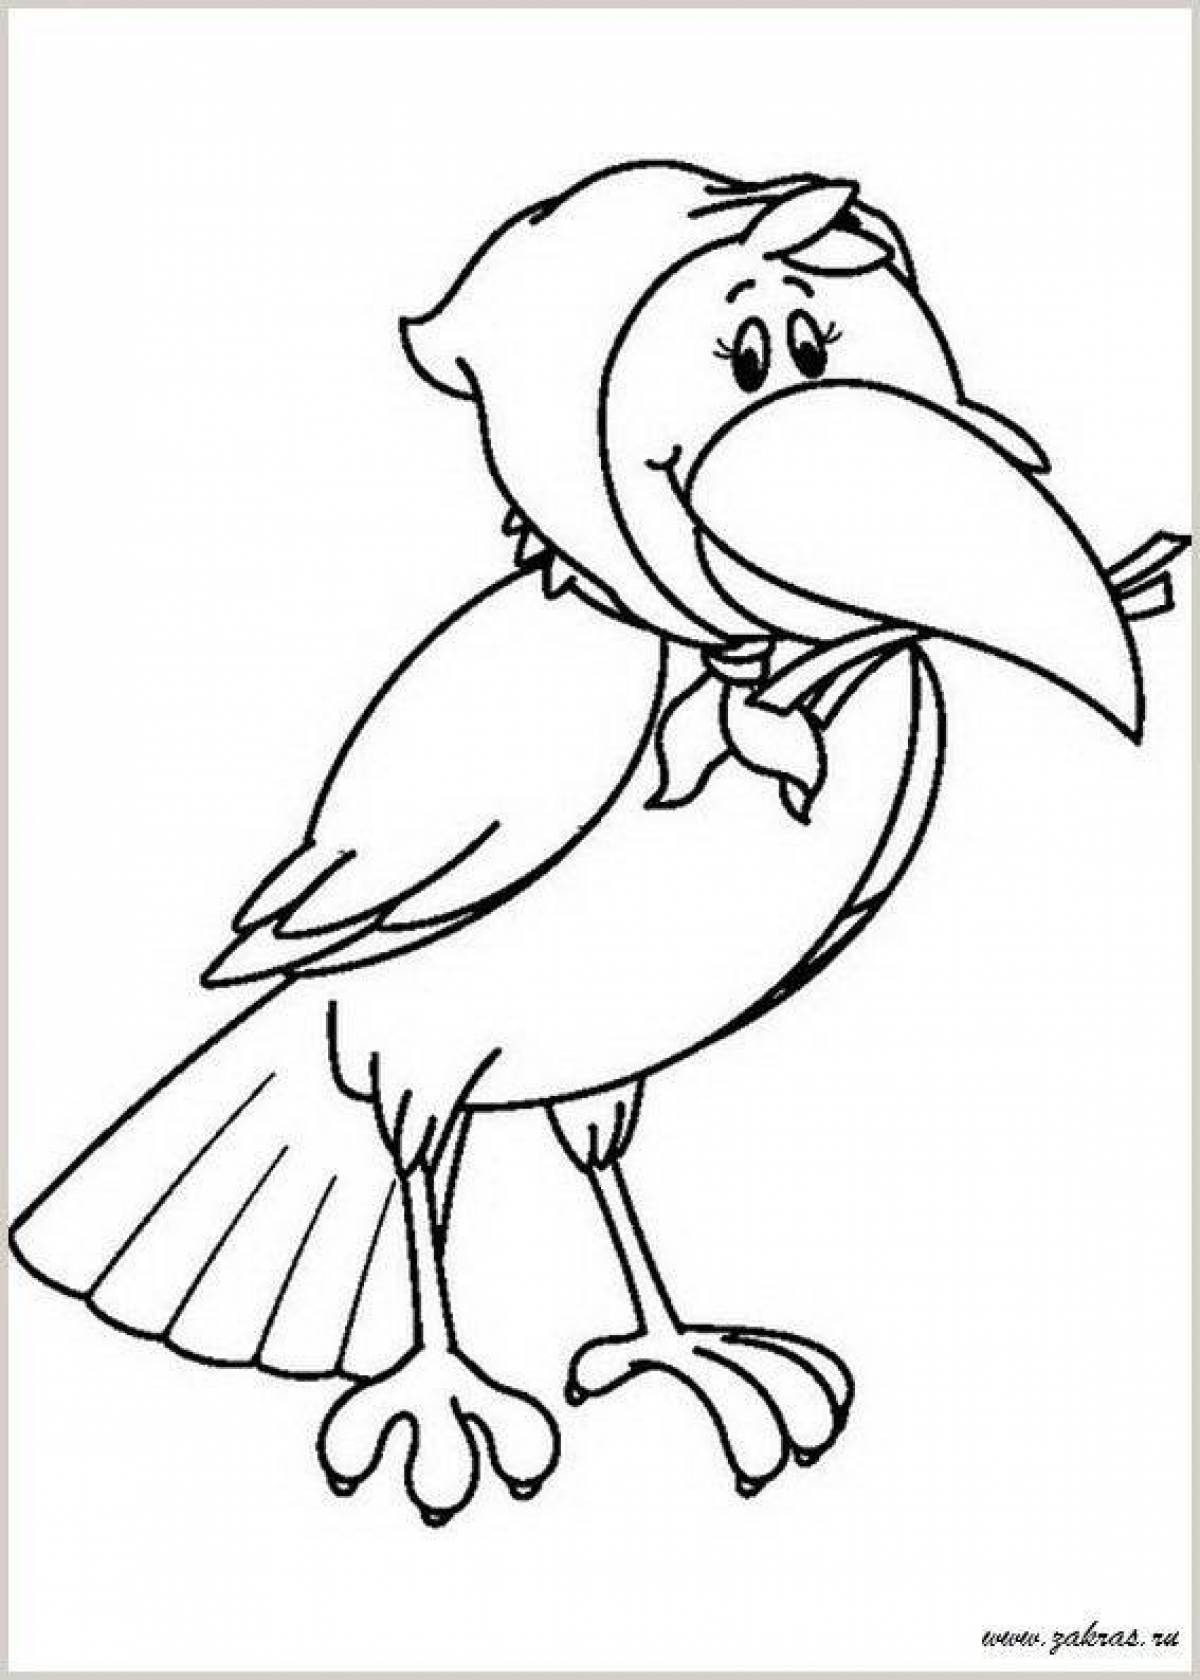 Crazy magpie coloring book for kids